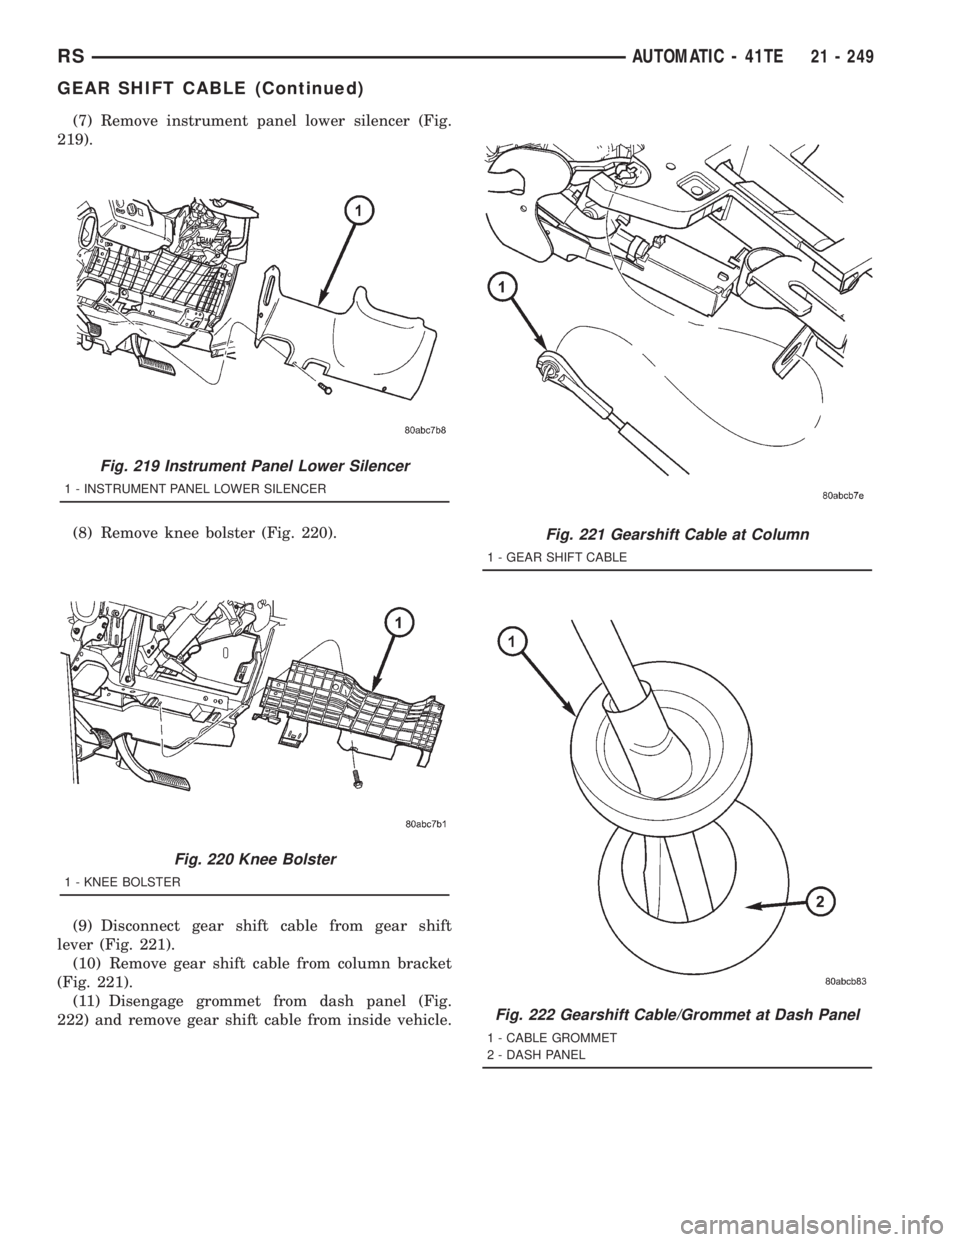 CHRYSLER VOYAGER 2001  Service Manual (7) Remove instrument panel lower silencer (Fig.
219).
(8) Remove knee bolster (Fig. 220).
(9) Disconnect gear shift cable from gear shift
lever (Fig. 221).
(10) Remove gear shift cable from column br